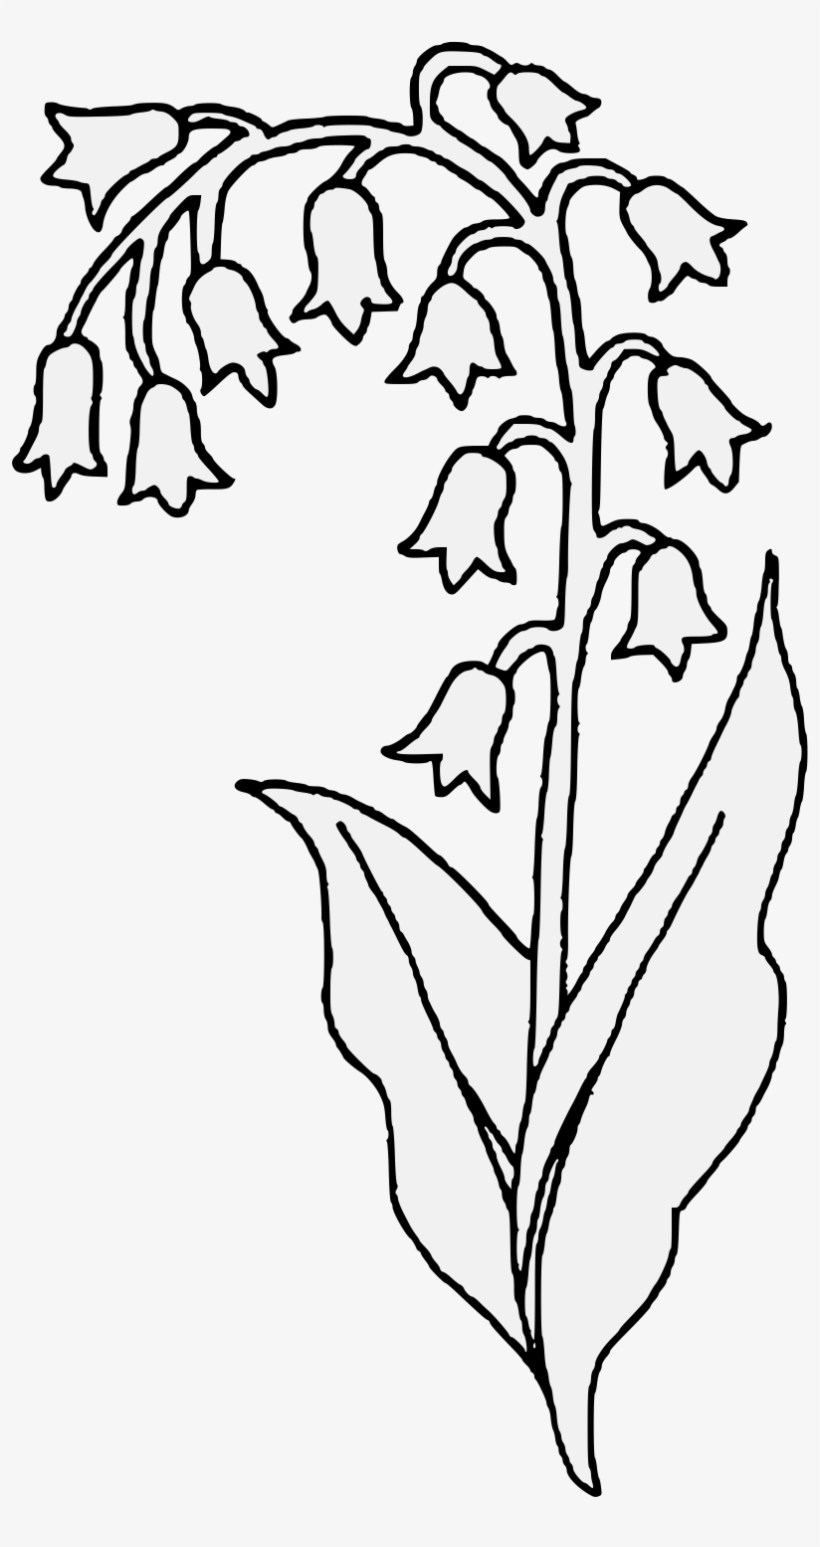 Lily Of The Valley Flower Drawing At Getdrawings - Lilies Of The Valley Clip Art, transparent png #126585